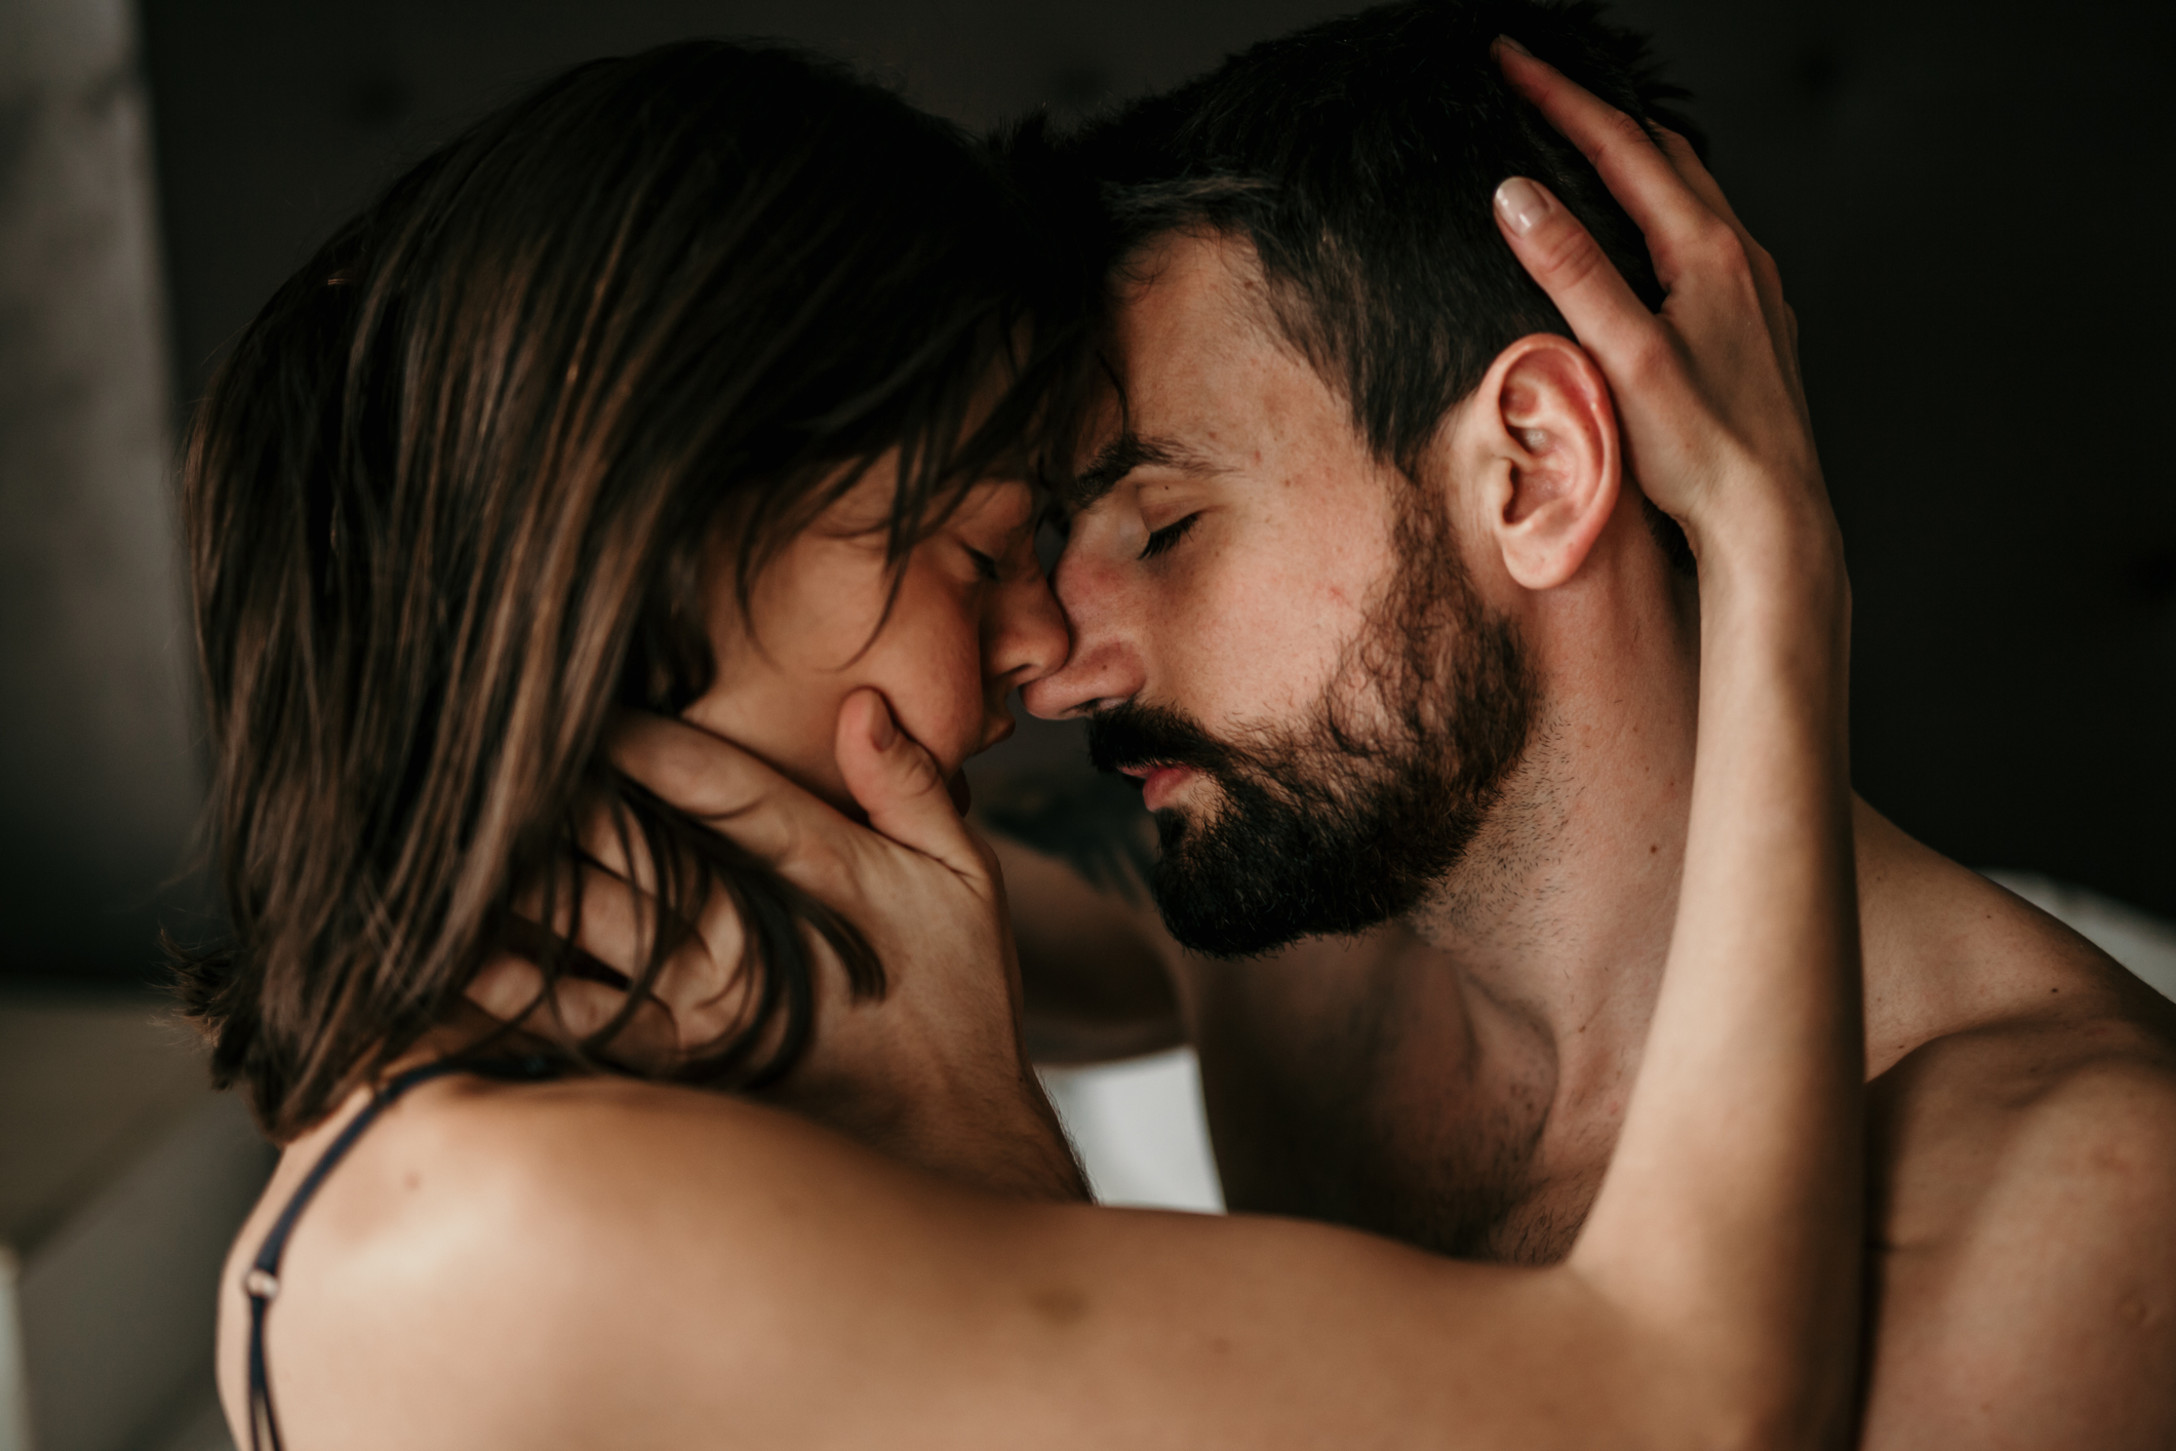 Use these sex hacks to instantly improve your love life